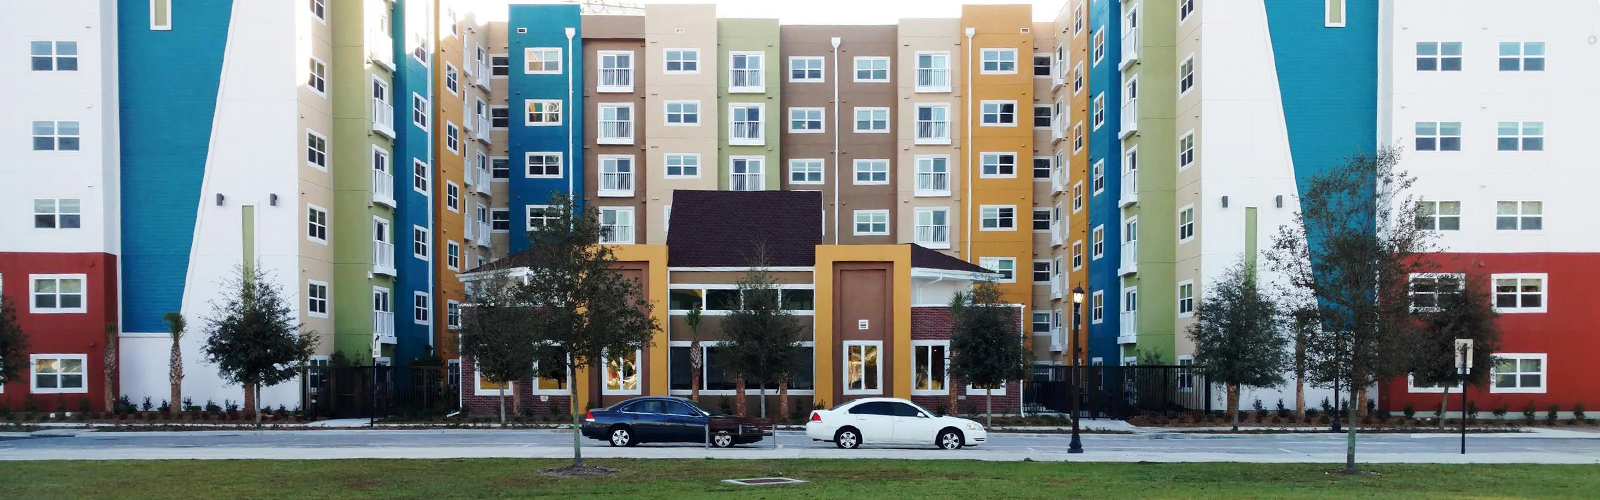 Tempo is the latest addition to the Tampa Housing Authority's ENCORE! development.